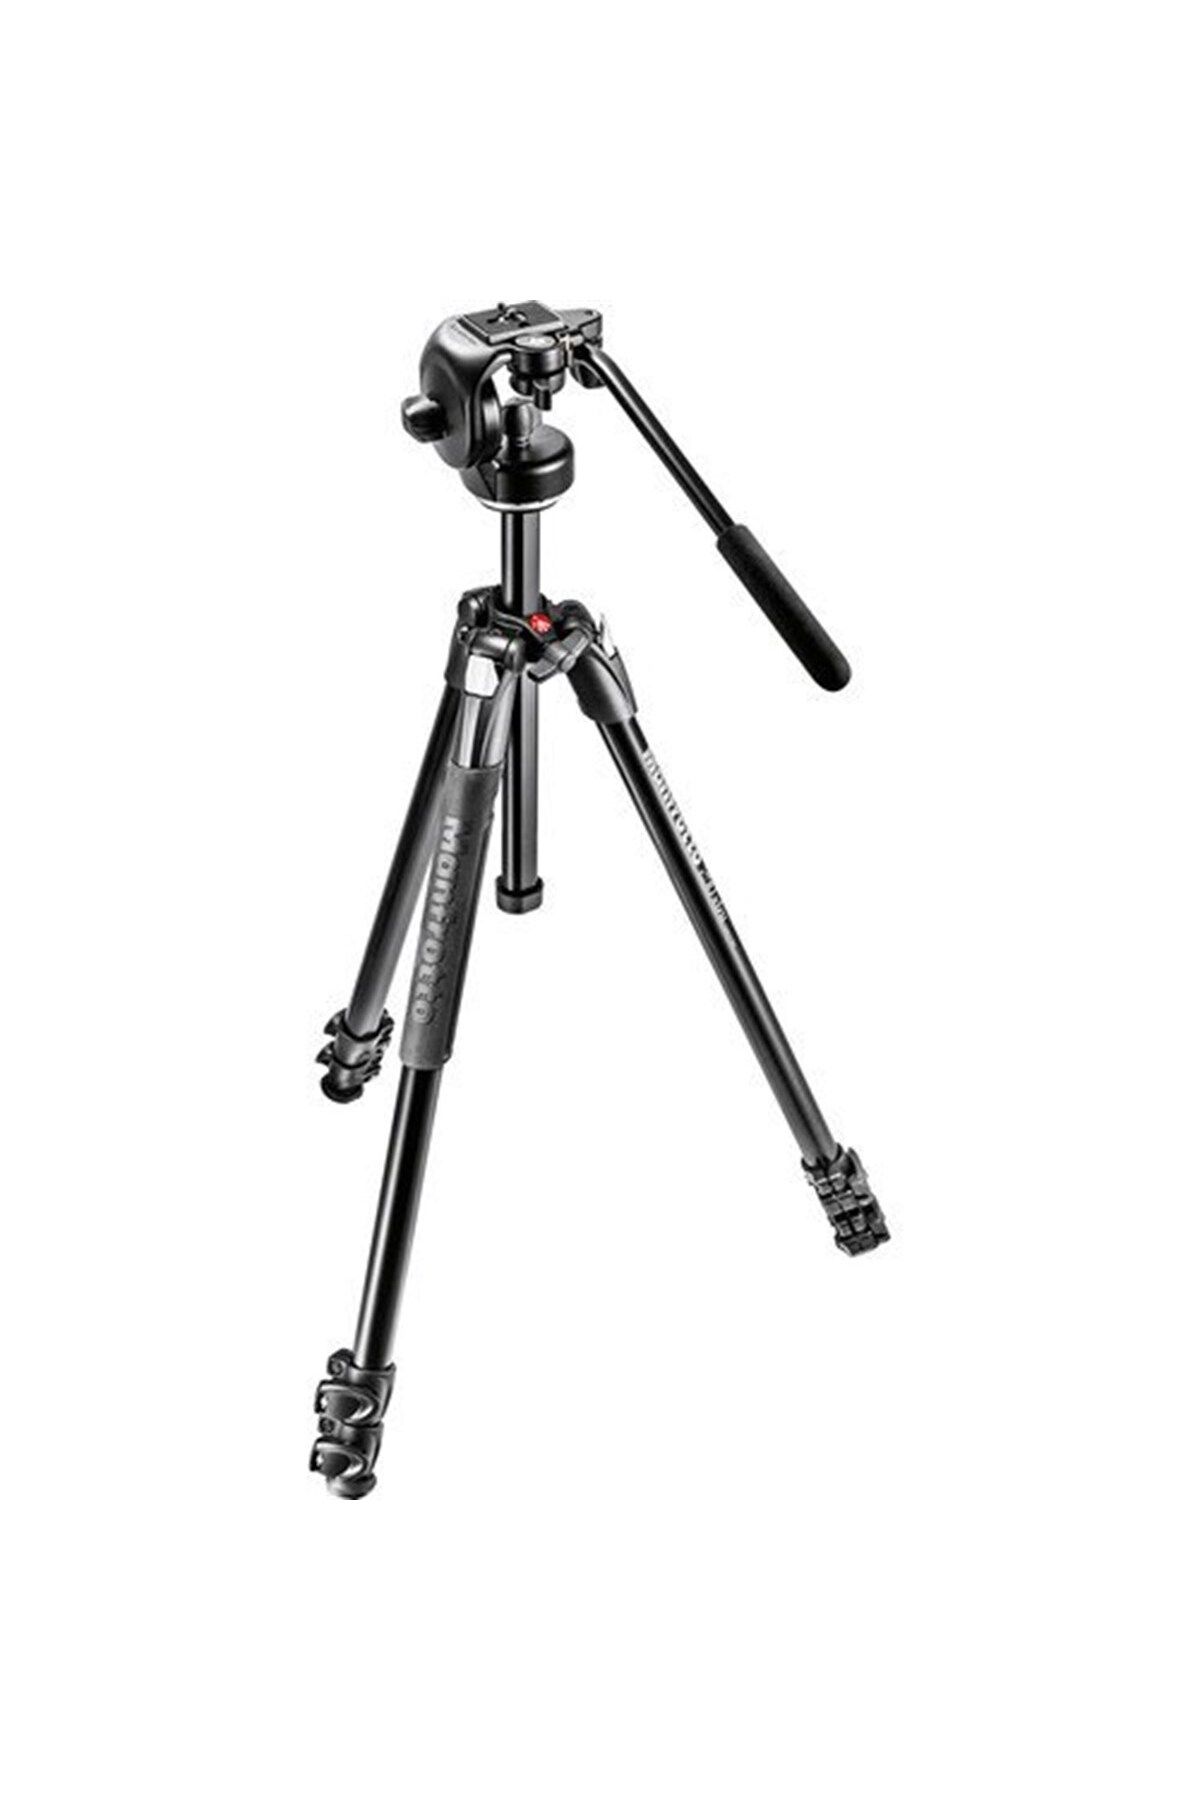 Manfrotto MK290XTA3-2W Alu 3-Section Tripod Kit with 128RC